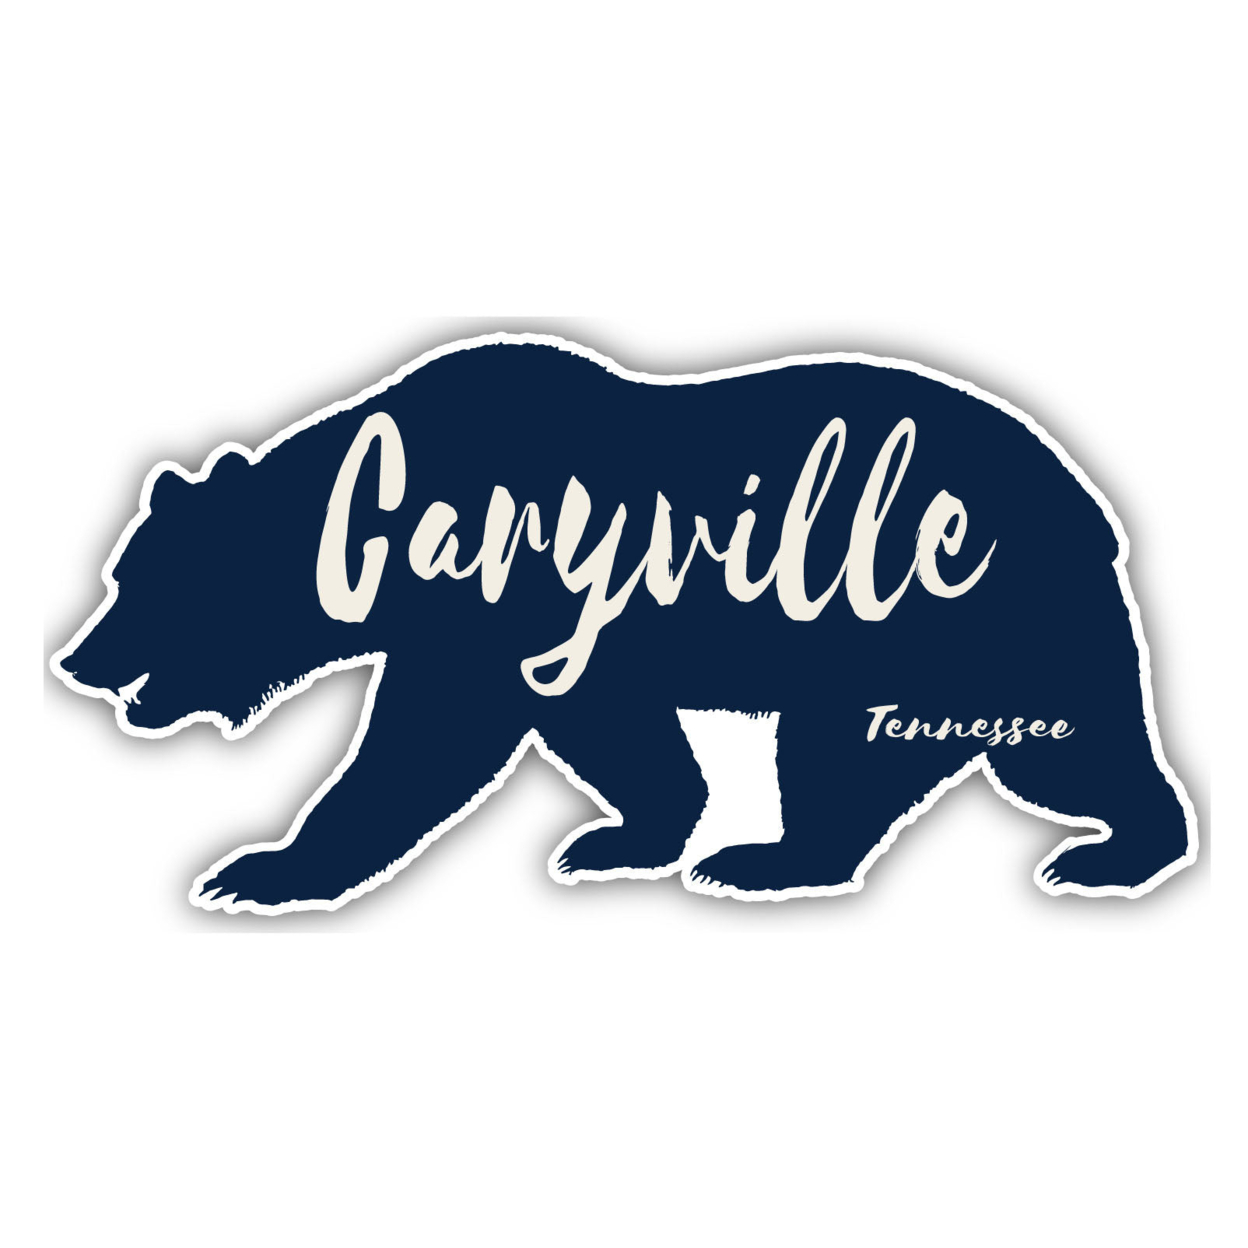 Caryville Tennessee Souvenir Decorative Stickers (Choose Theme And Size) - 4-Pack, 12-Inch, Tent